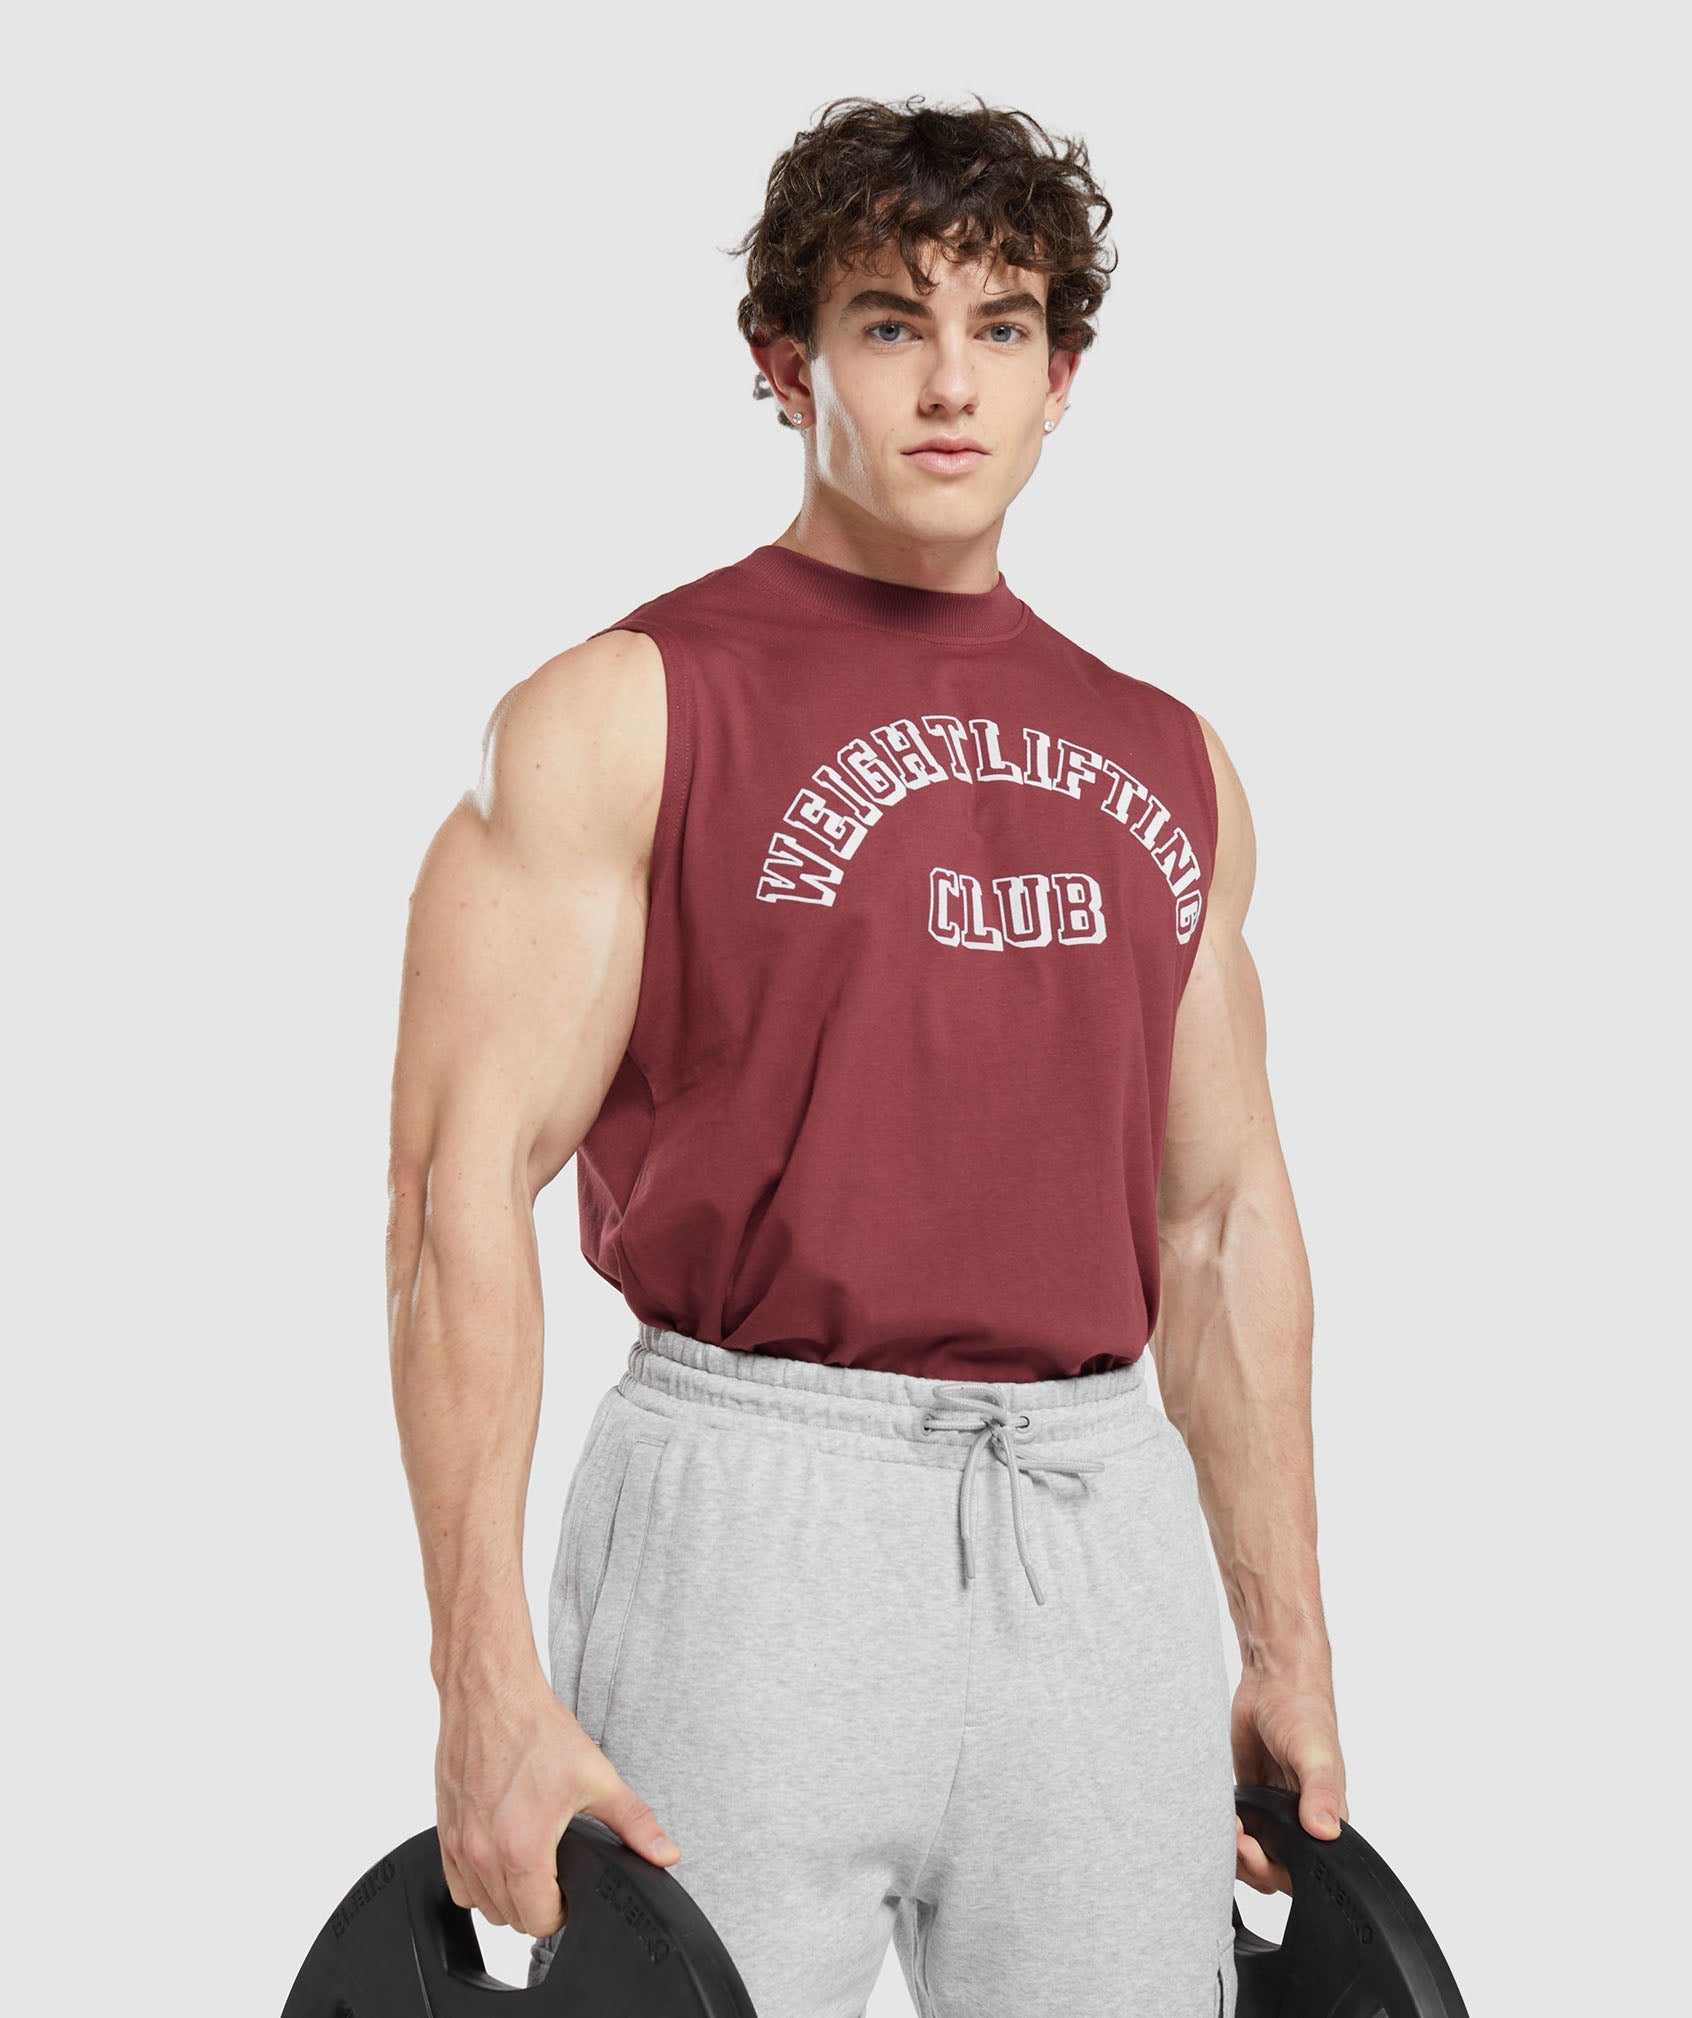 Weightlifting Club Tank in Washed Burgundy - view 6